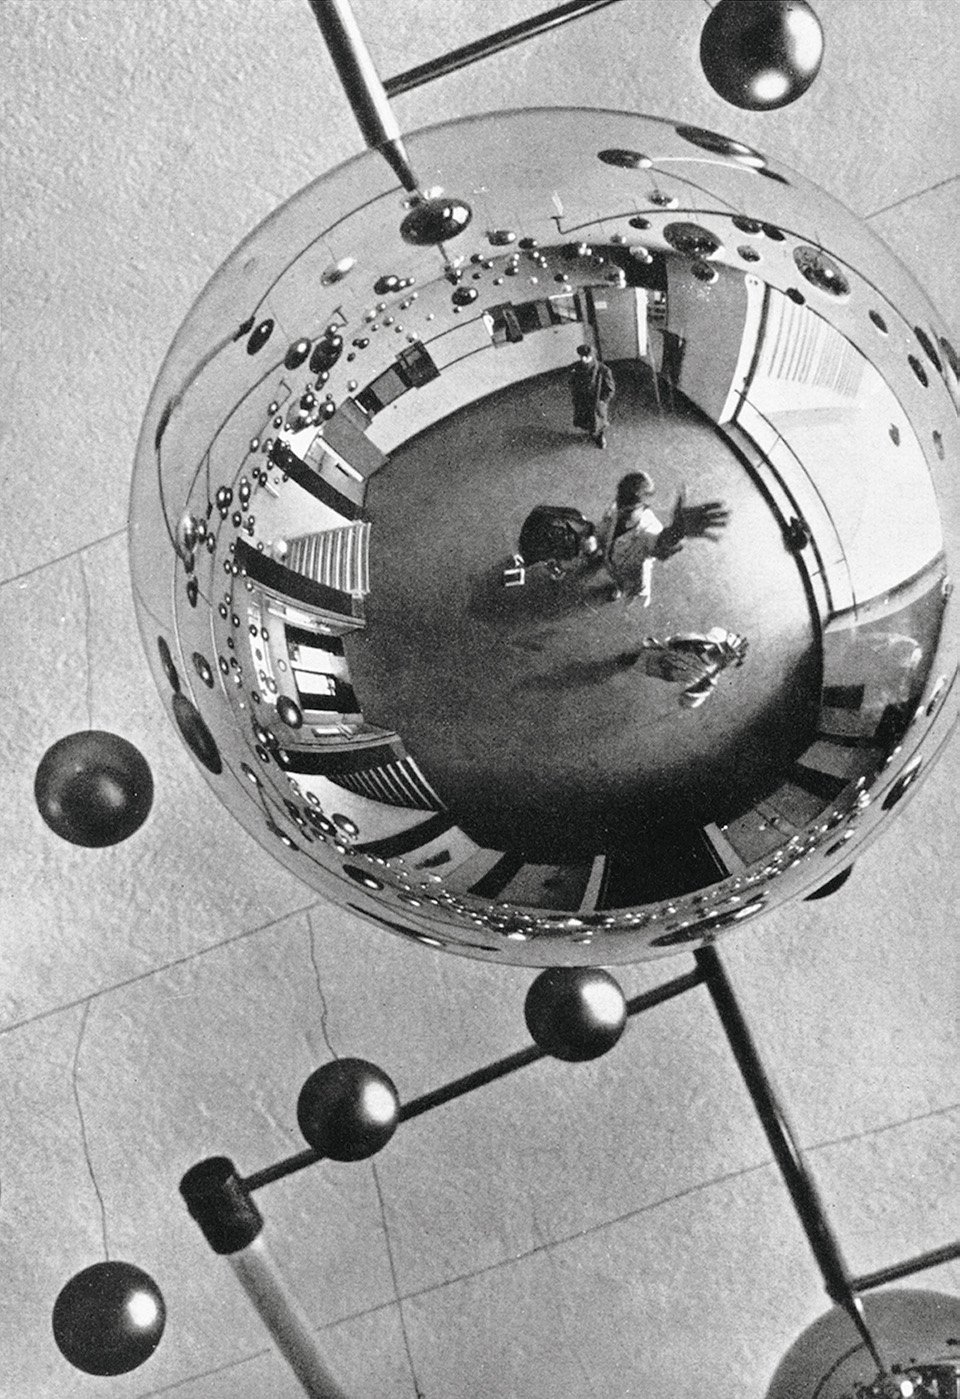 Seite 315 | Walter Funkat: The lobby of the Bauhaus building, reflected in one of the glass spheres which decorated the buidling during the Metallic Festival, 1929. Copyright: Bauhaus-Archiv, Berlin Inv. F2004/49.1; © Bauhaus-Archiv, Berlin